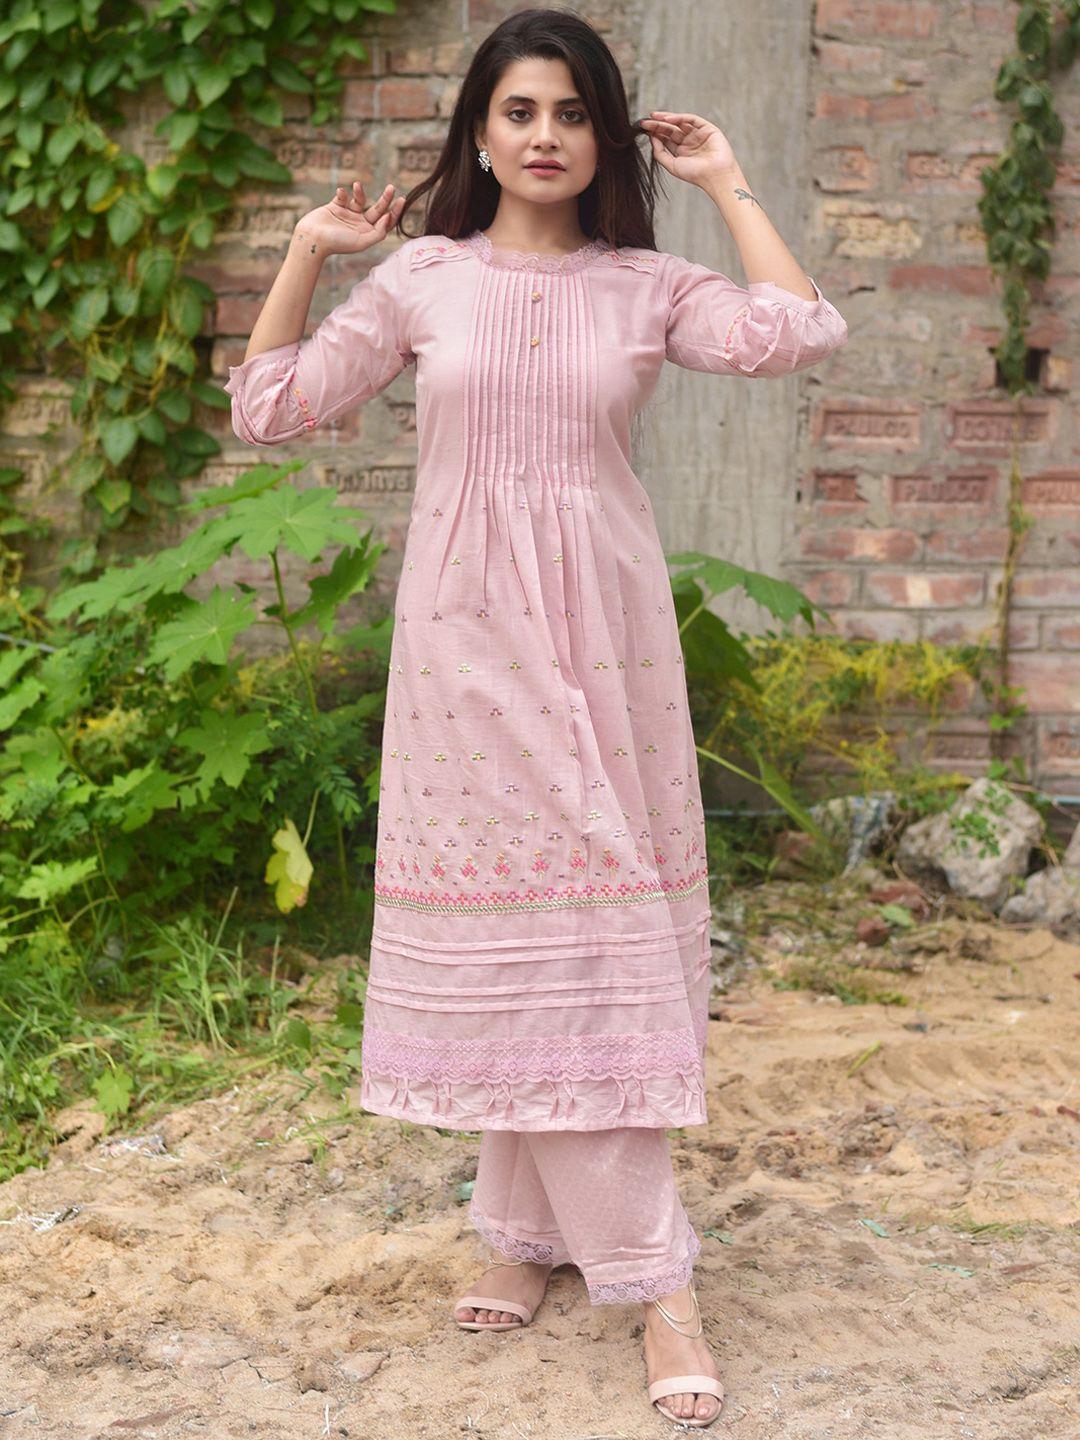 autumn lane women pink floral embroidered cotton blend empire kurta with palazzos